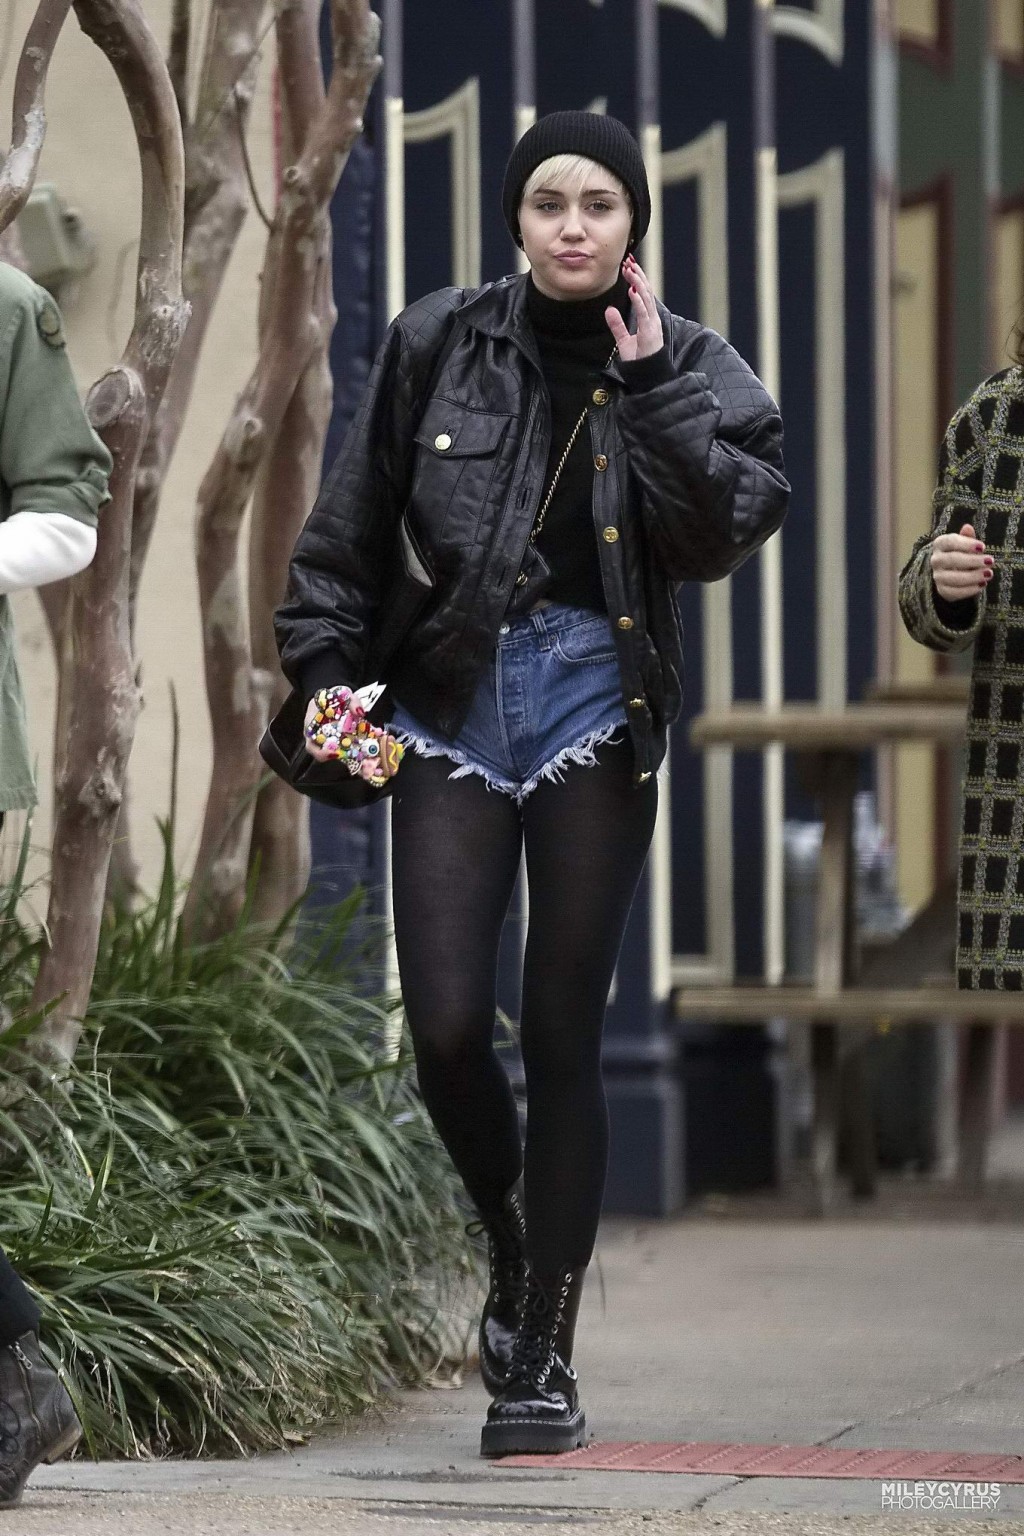 Miley Cyrus shows off her legs and ass wearing the denim shorts  black pantyhose #75201619